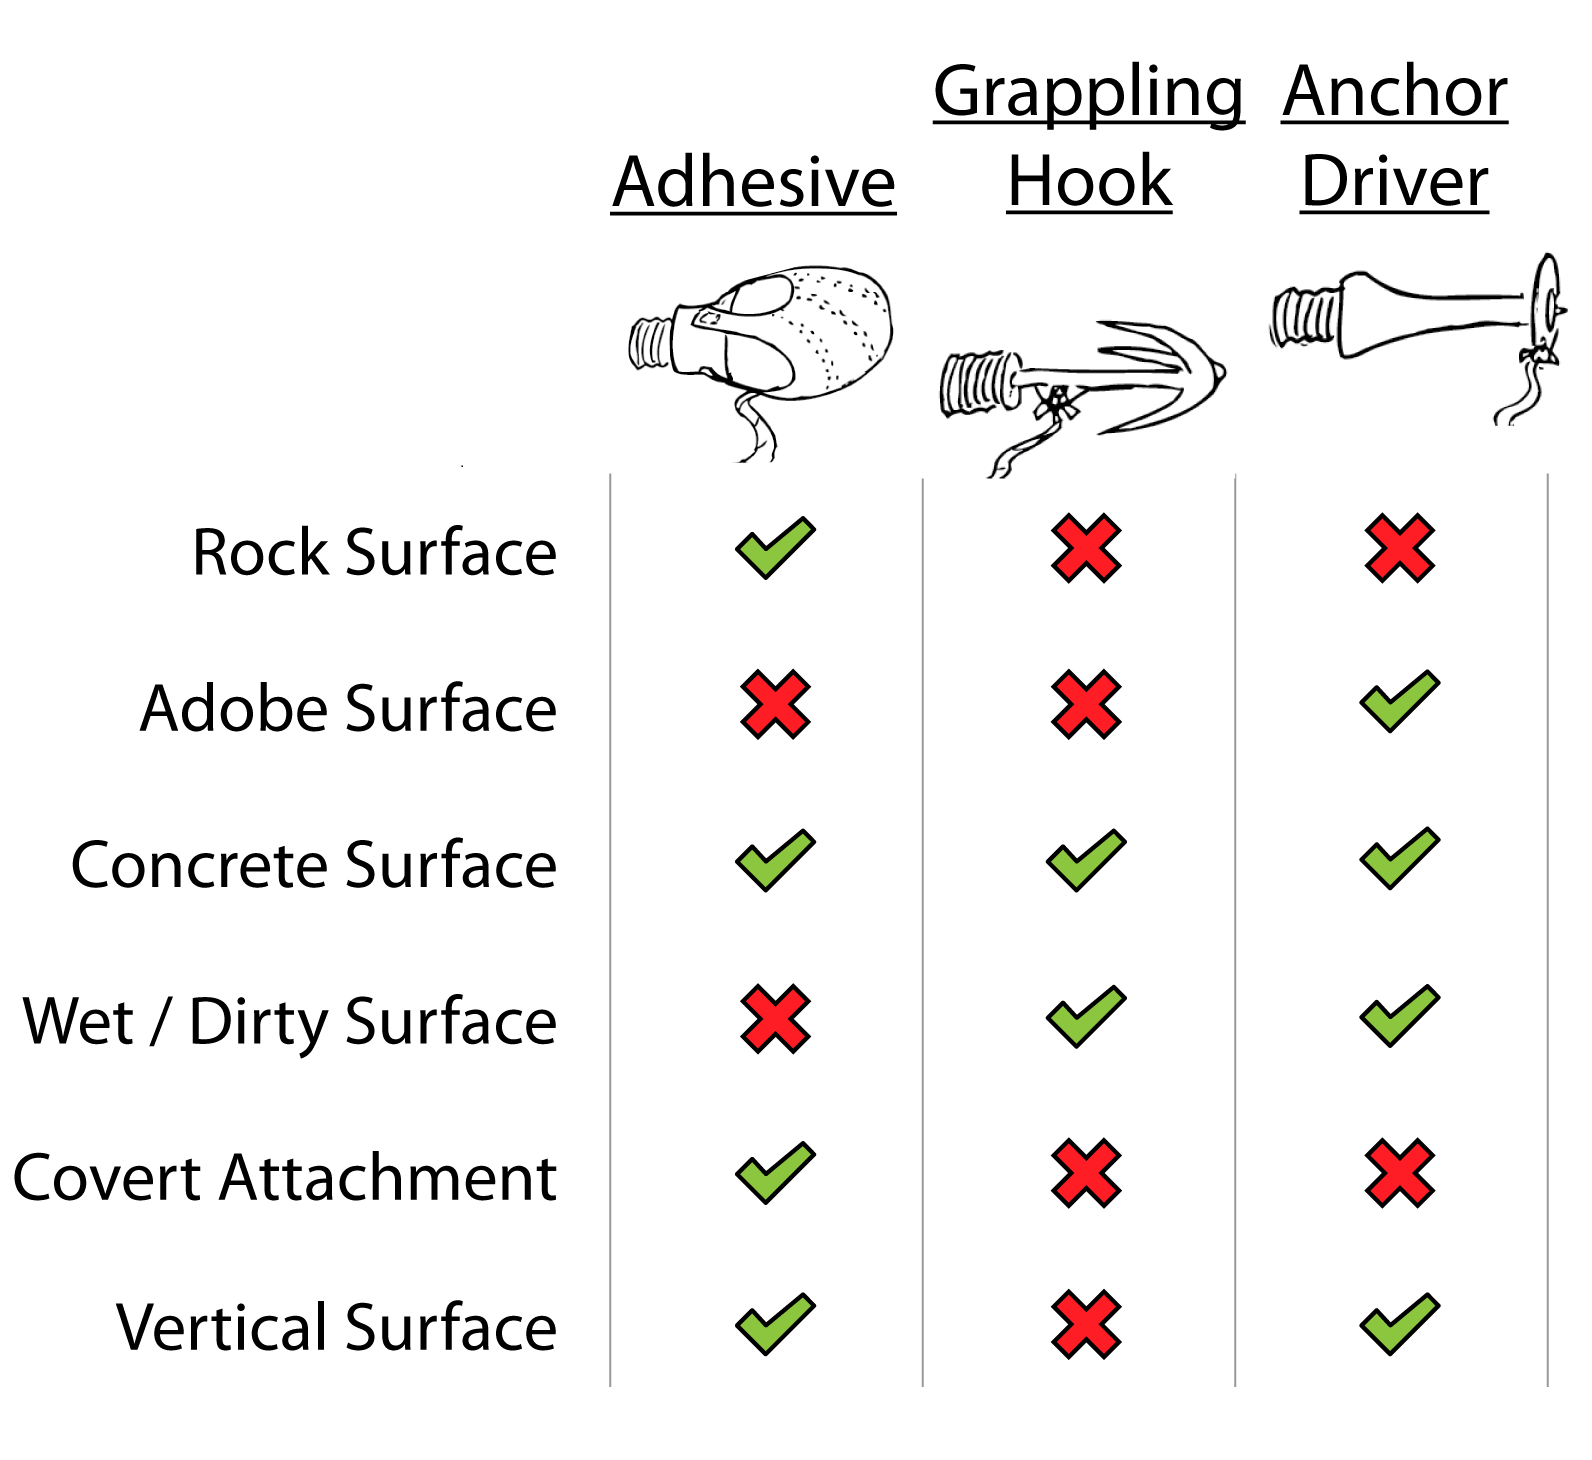 Comparison table between different wall attachment approaches